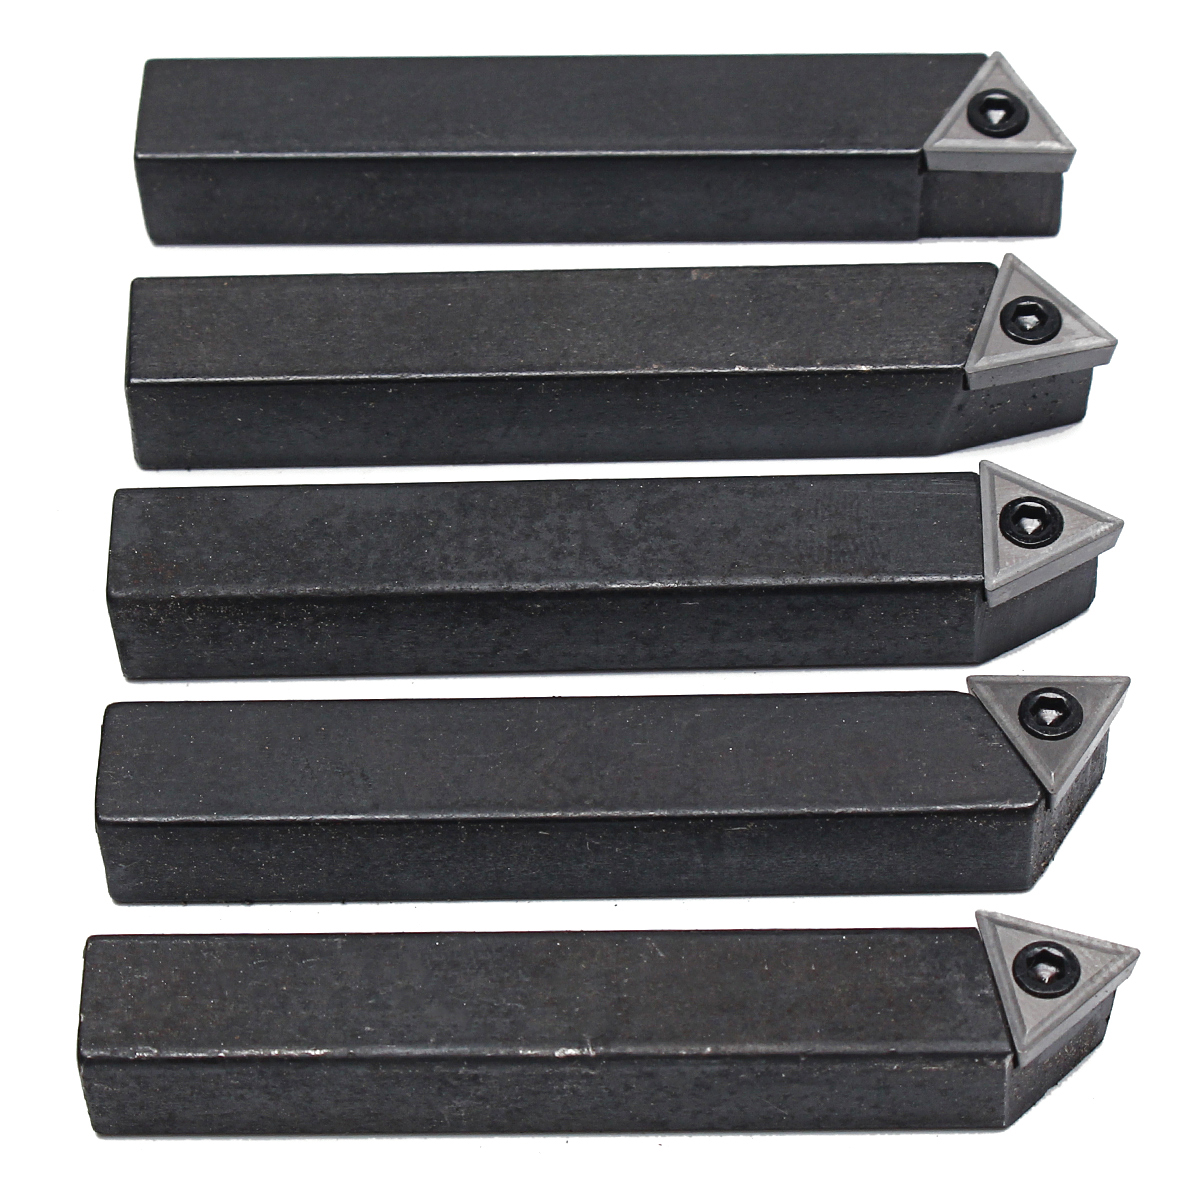 Mini-Quick-Change-Tool-Post-Holder-Set-with-9pcs-38-Inch-Boring-Bar-and-5pcs-Indexable-Blade-1190276-7